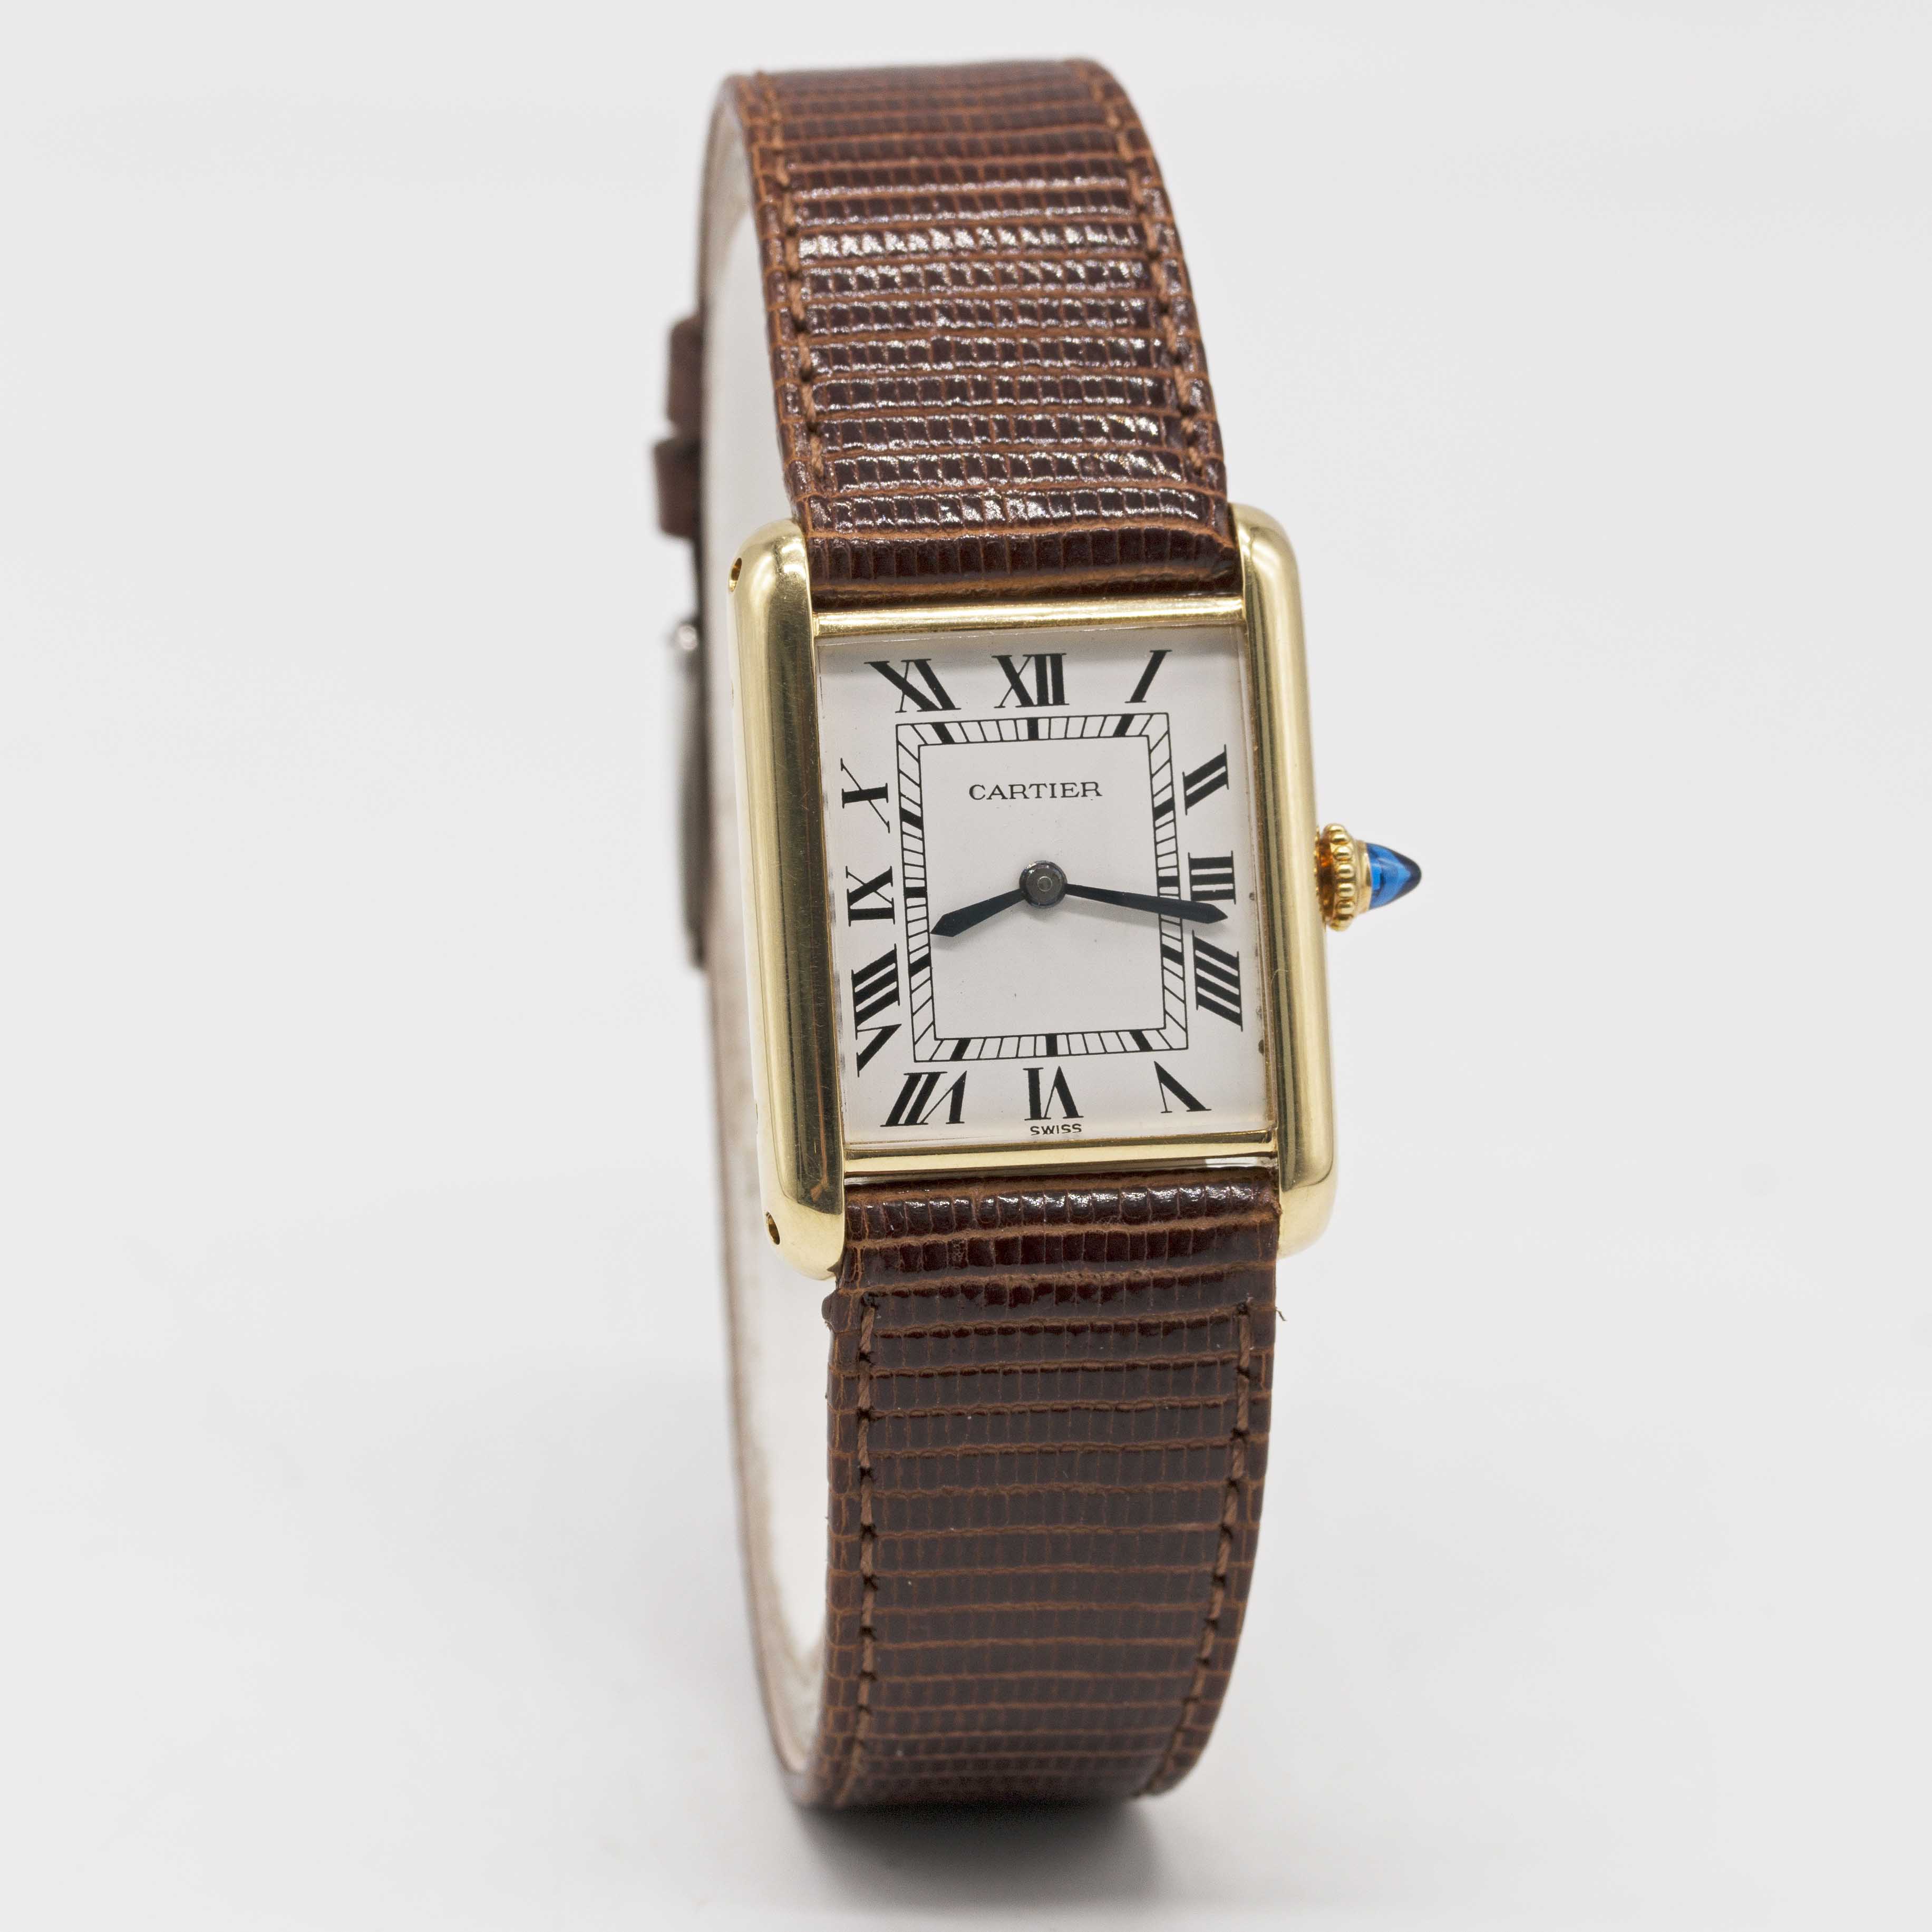 A GENTLEMAN'S SIZE 18K SOLID GOLD CARTIER TANK WRIST WATCH CIRCA 1980s Movement: Manual wind, signed - Image 5 of 9